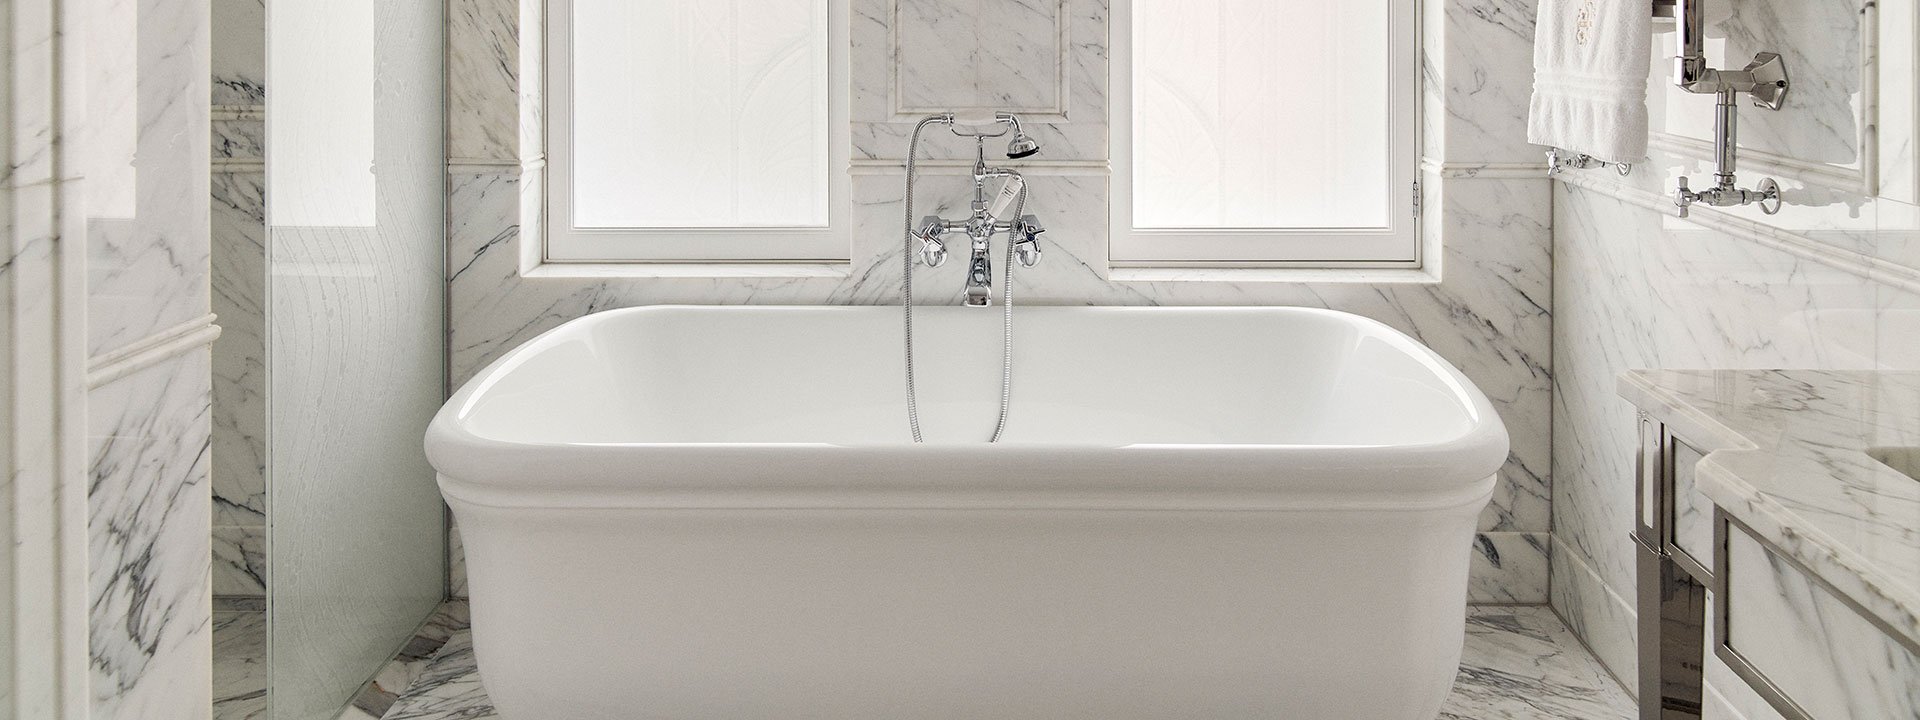 A view of the bathtub in the luxurious marble bathroom of the Corner Suite, perfect for relaxation.